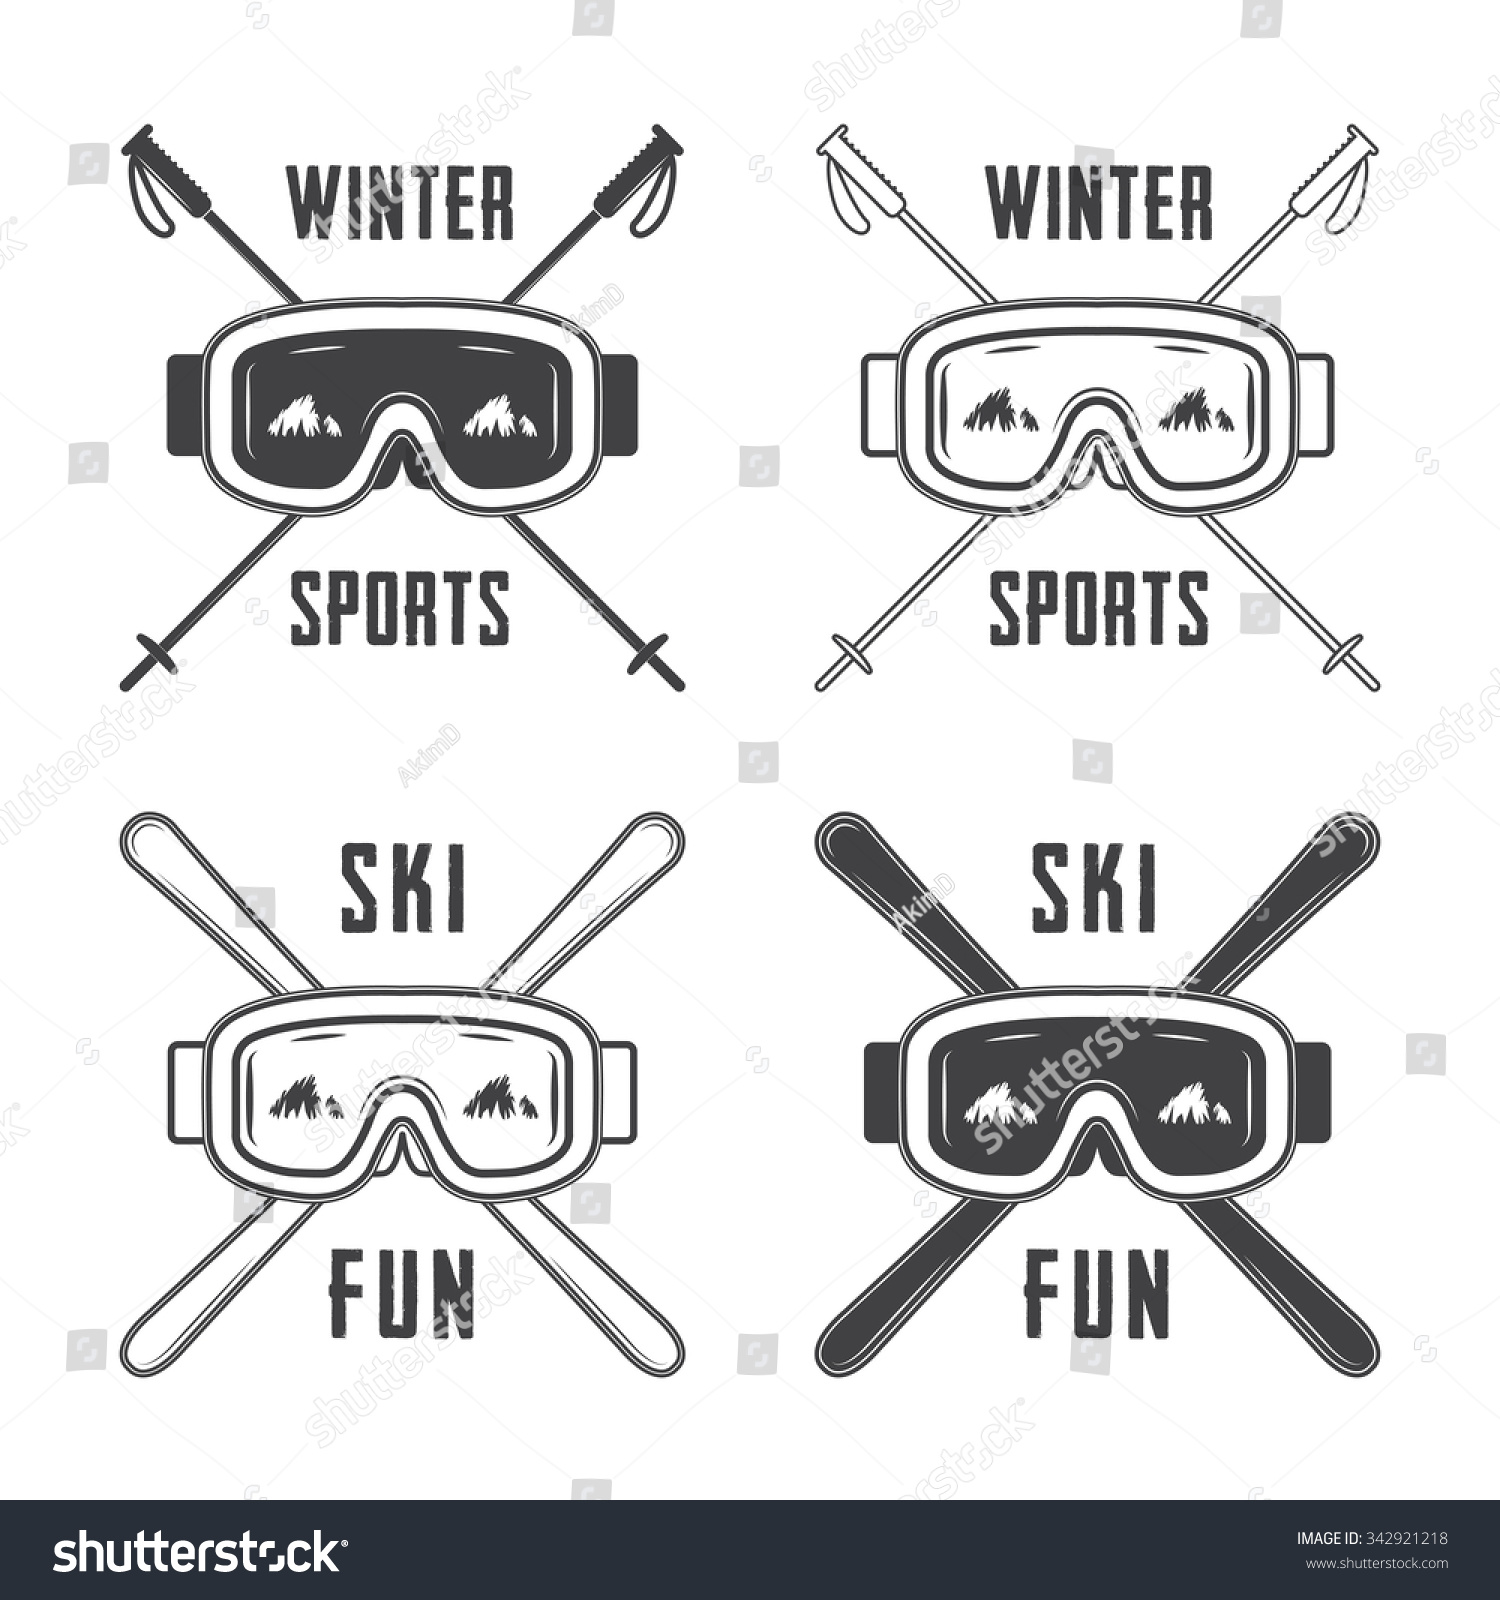 Vintage Ski And Arctic Expeditions Logos, Badges, Emblems And Design ...